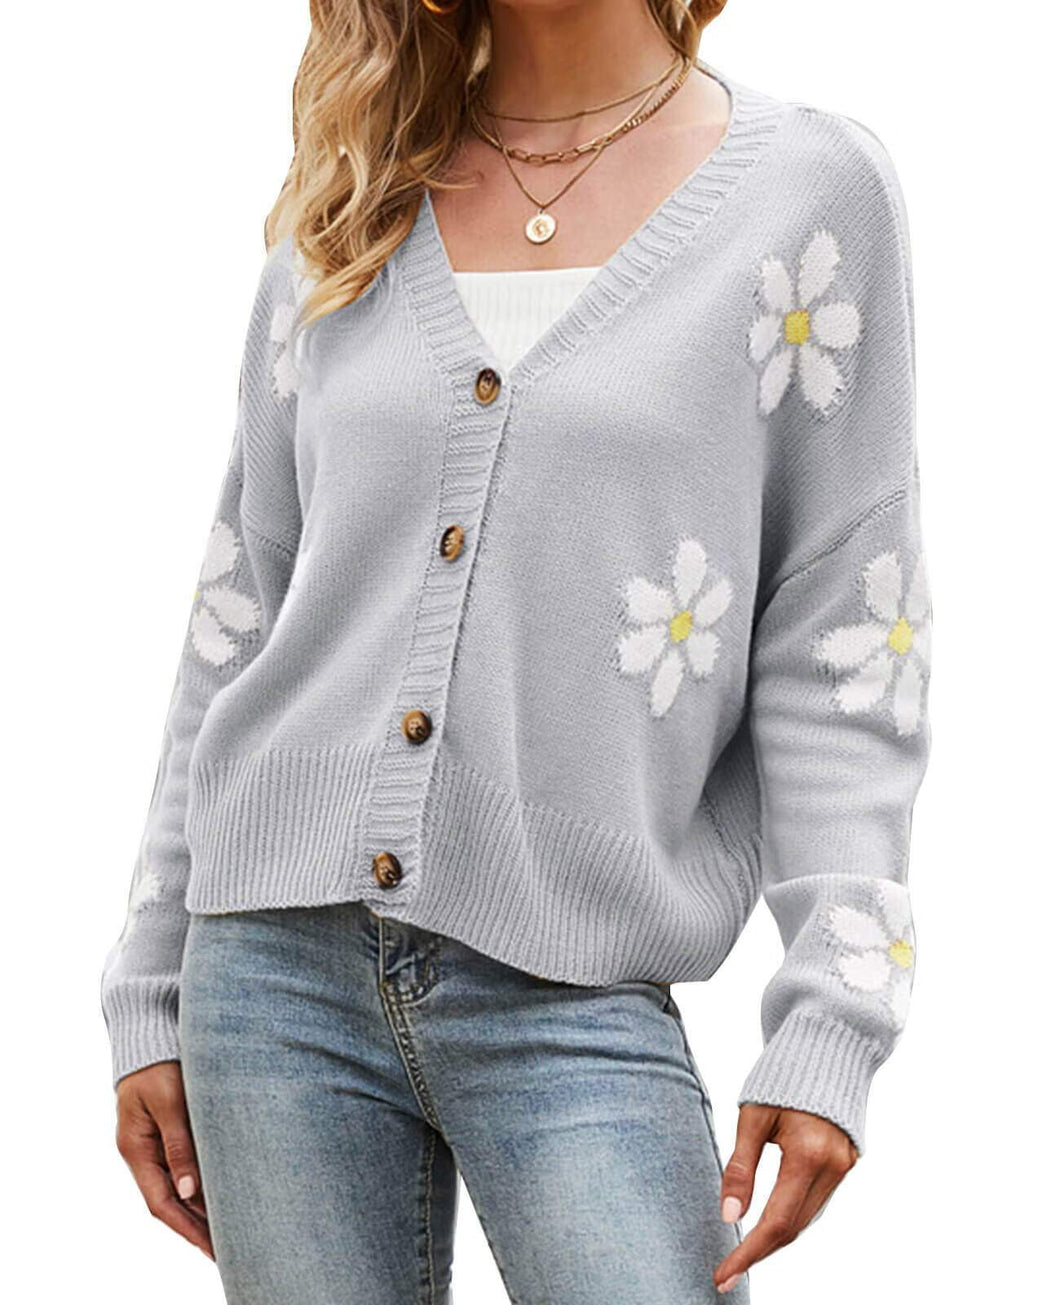 Alsol Lamesa Women's Cardigan Sweater Floral Print Open Front Buton Down Soft Knit Cardigans Sweater